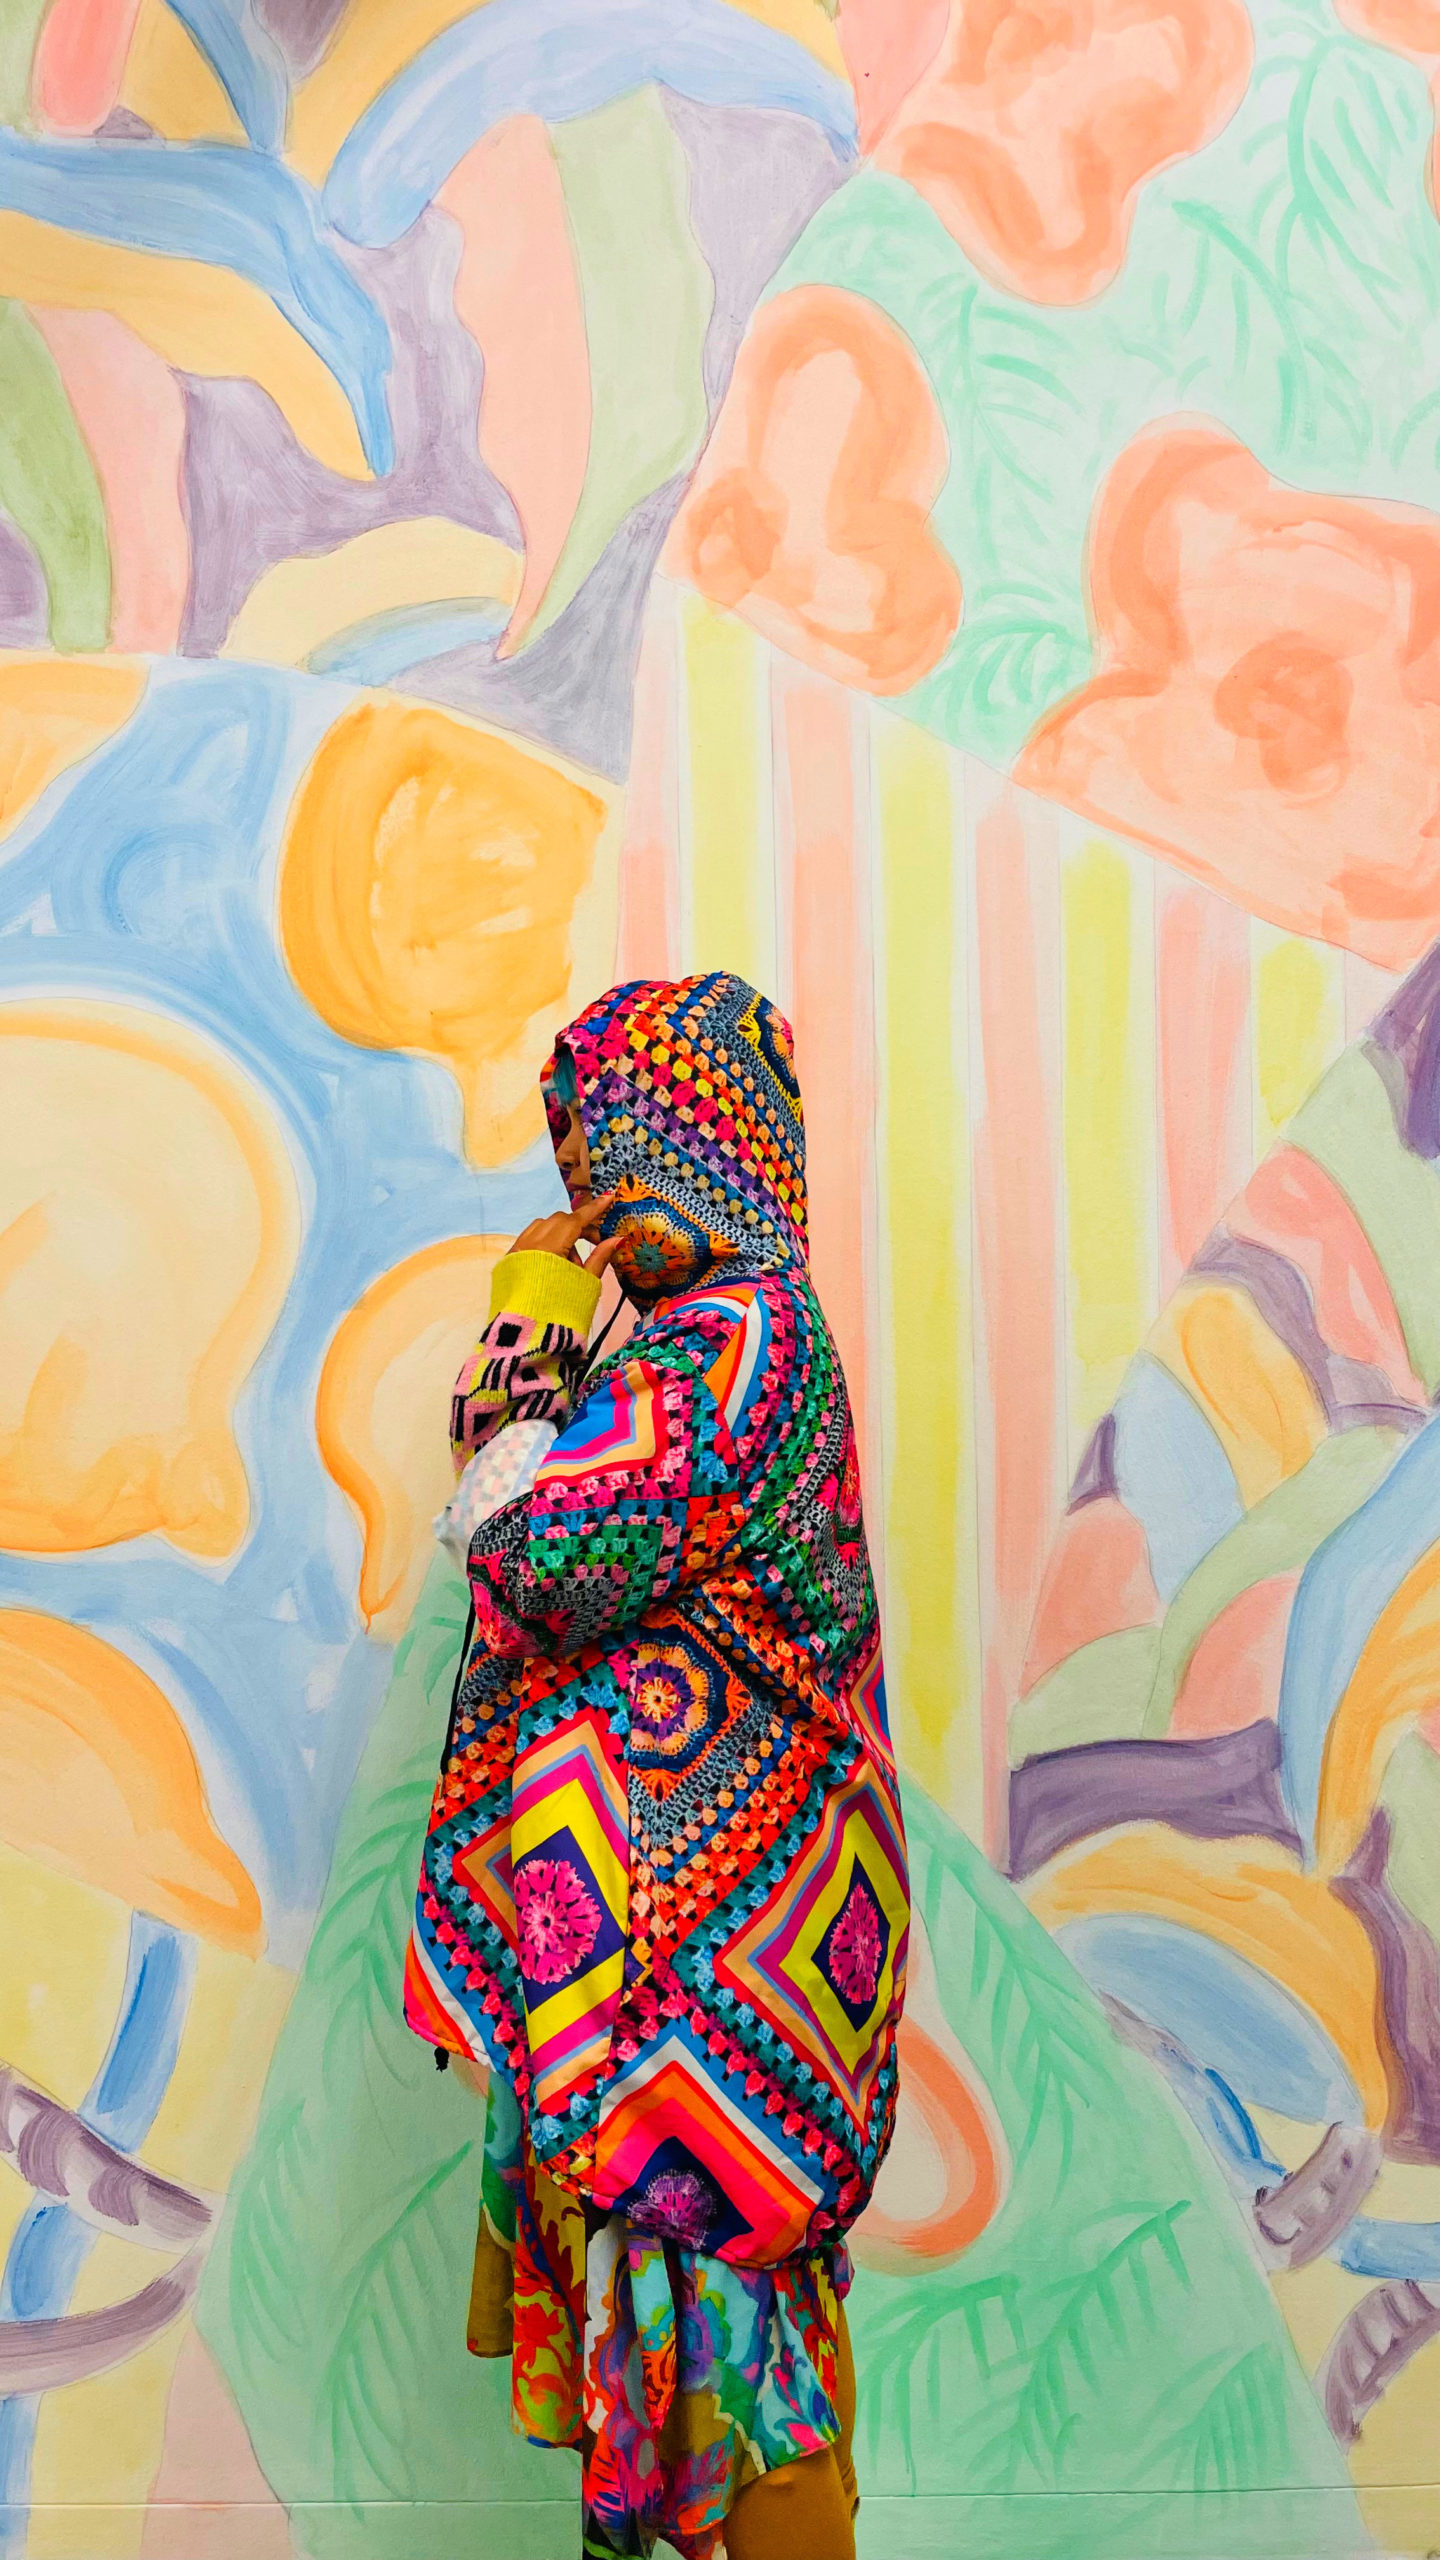 wall of colourful art with person standing profile in raincoat infront